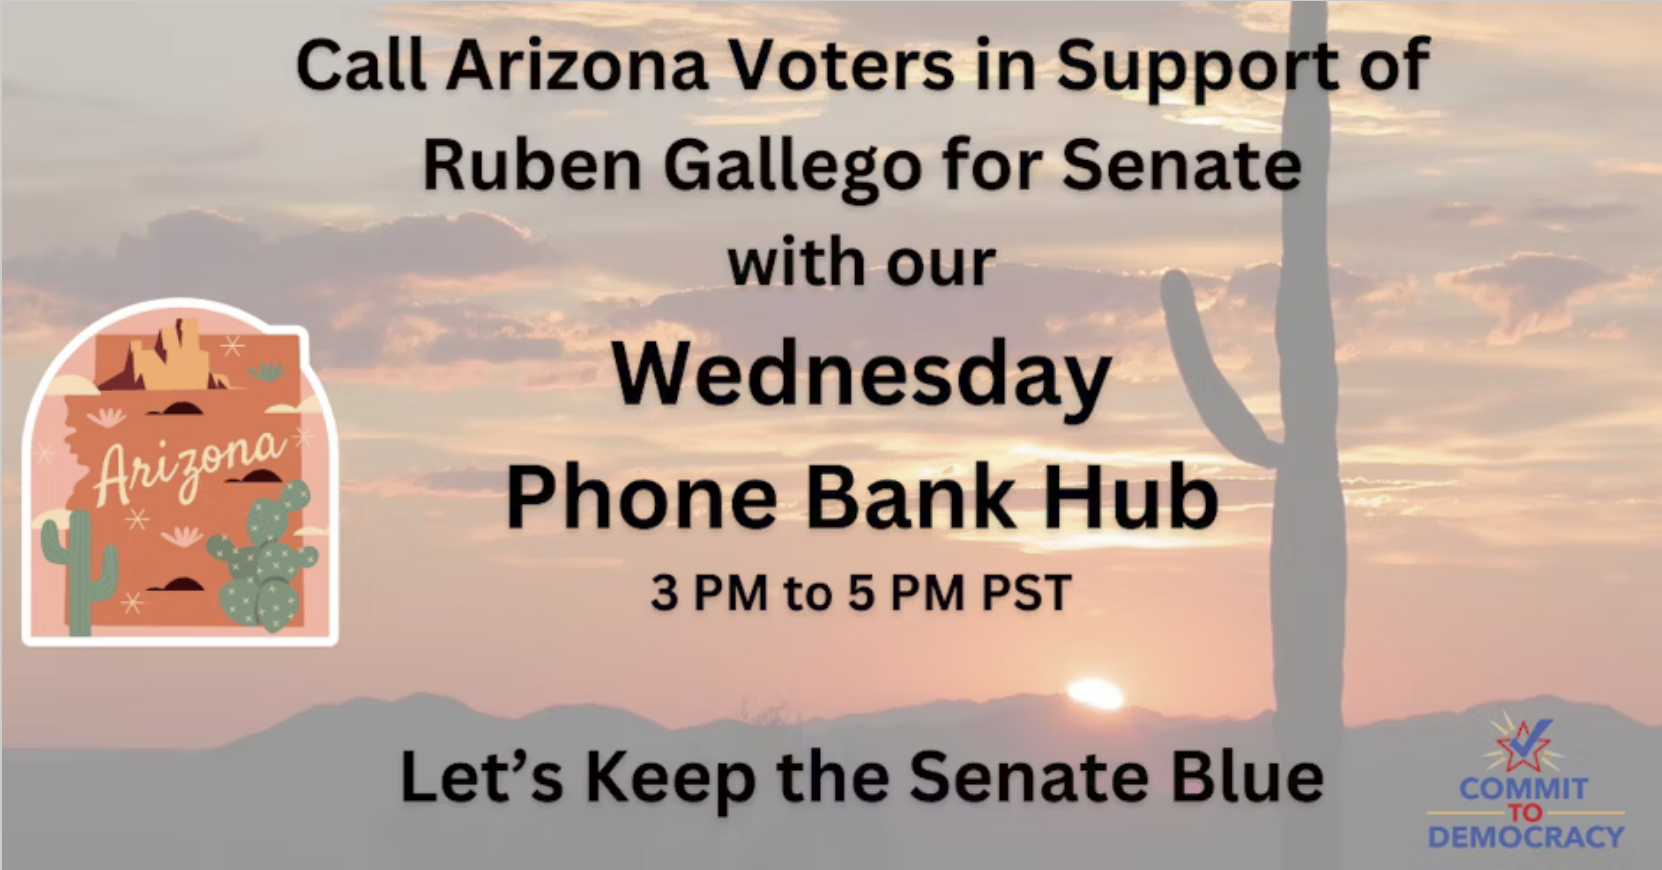 Weds phone bank hub, 3-5 pm PST. Call AZ voters supporting Ruben Gallego for Senate.